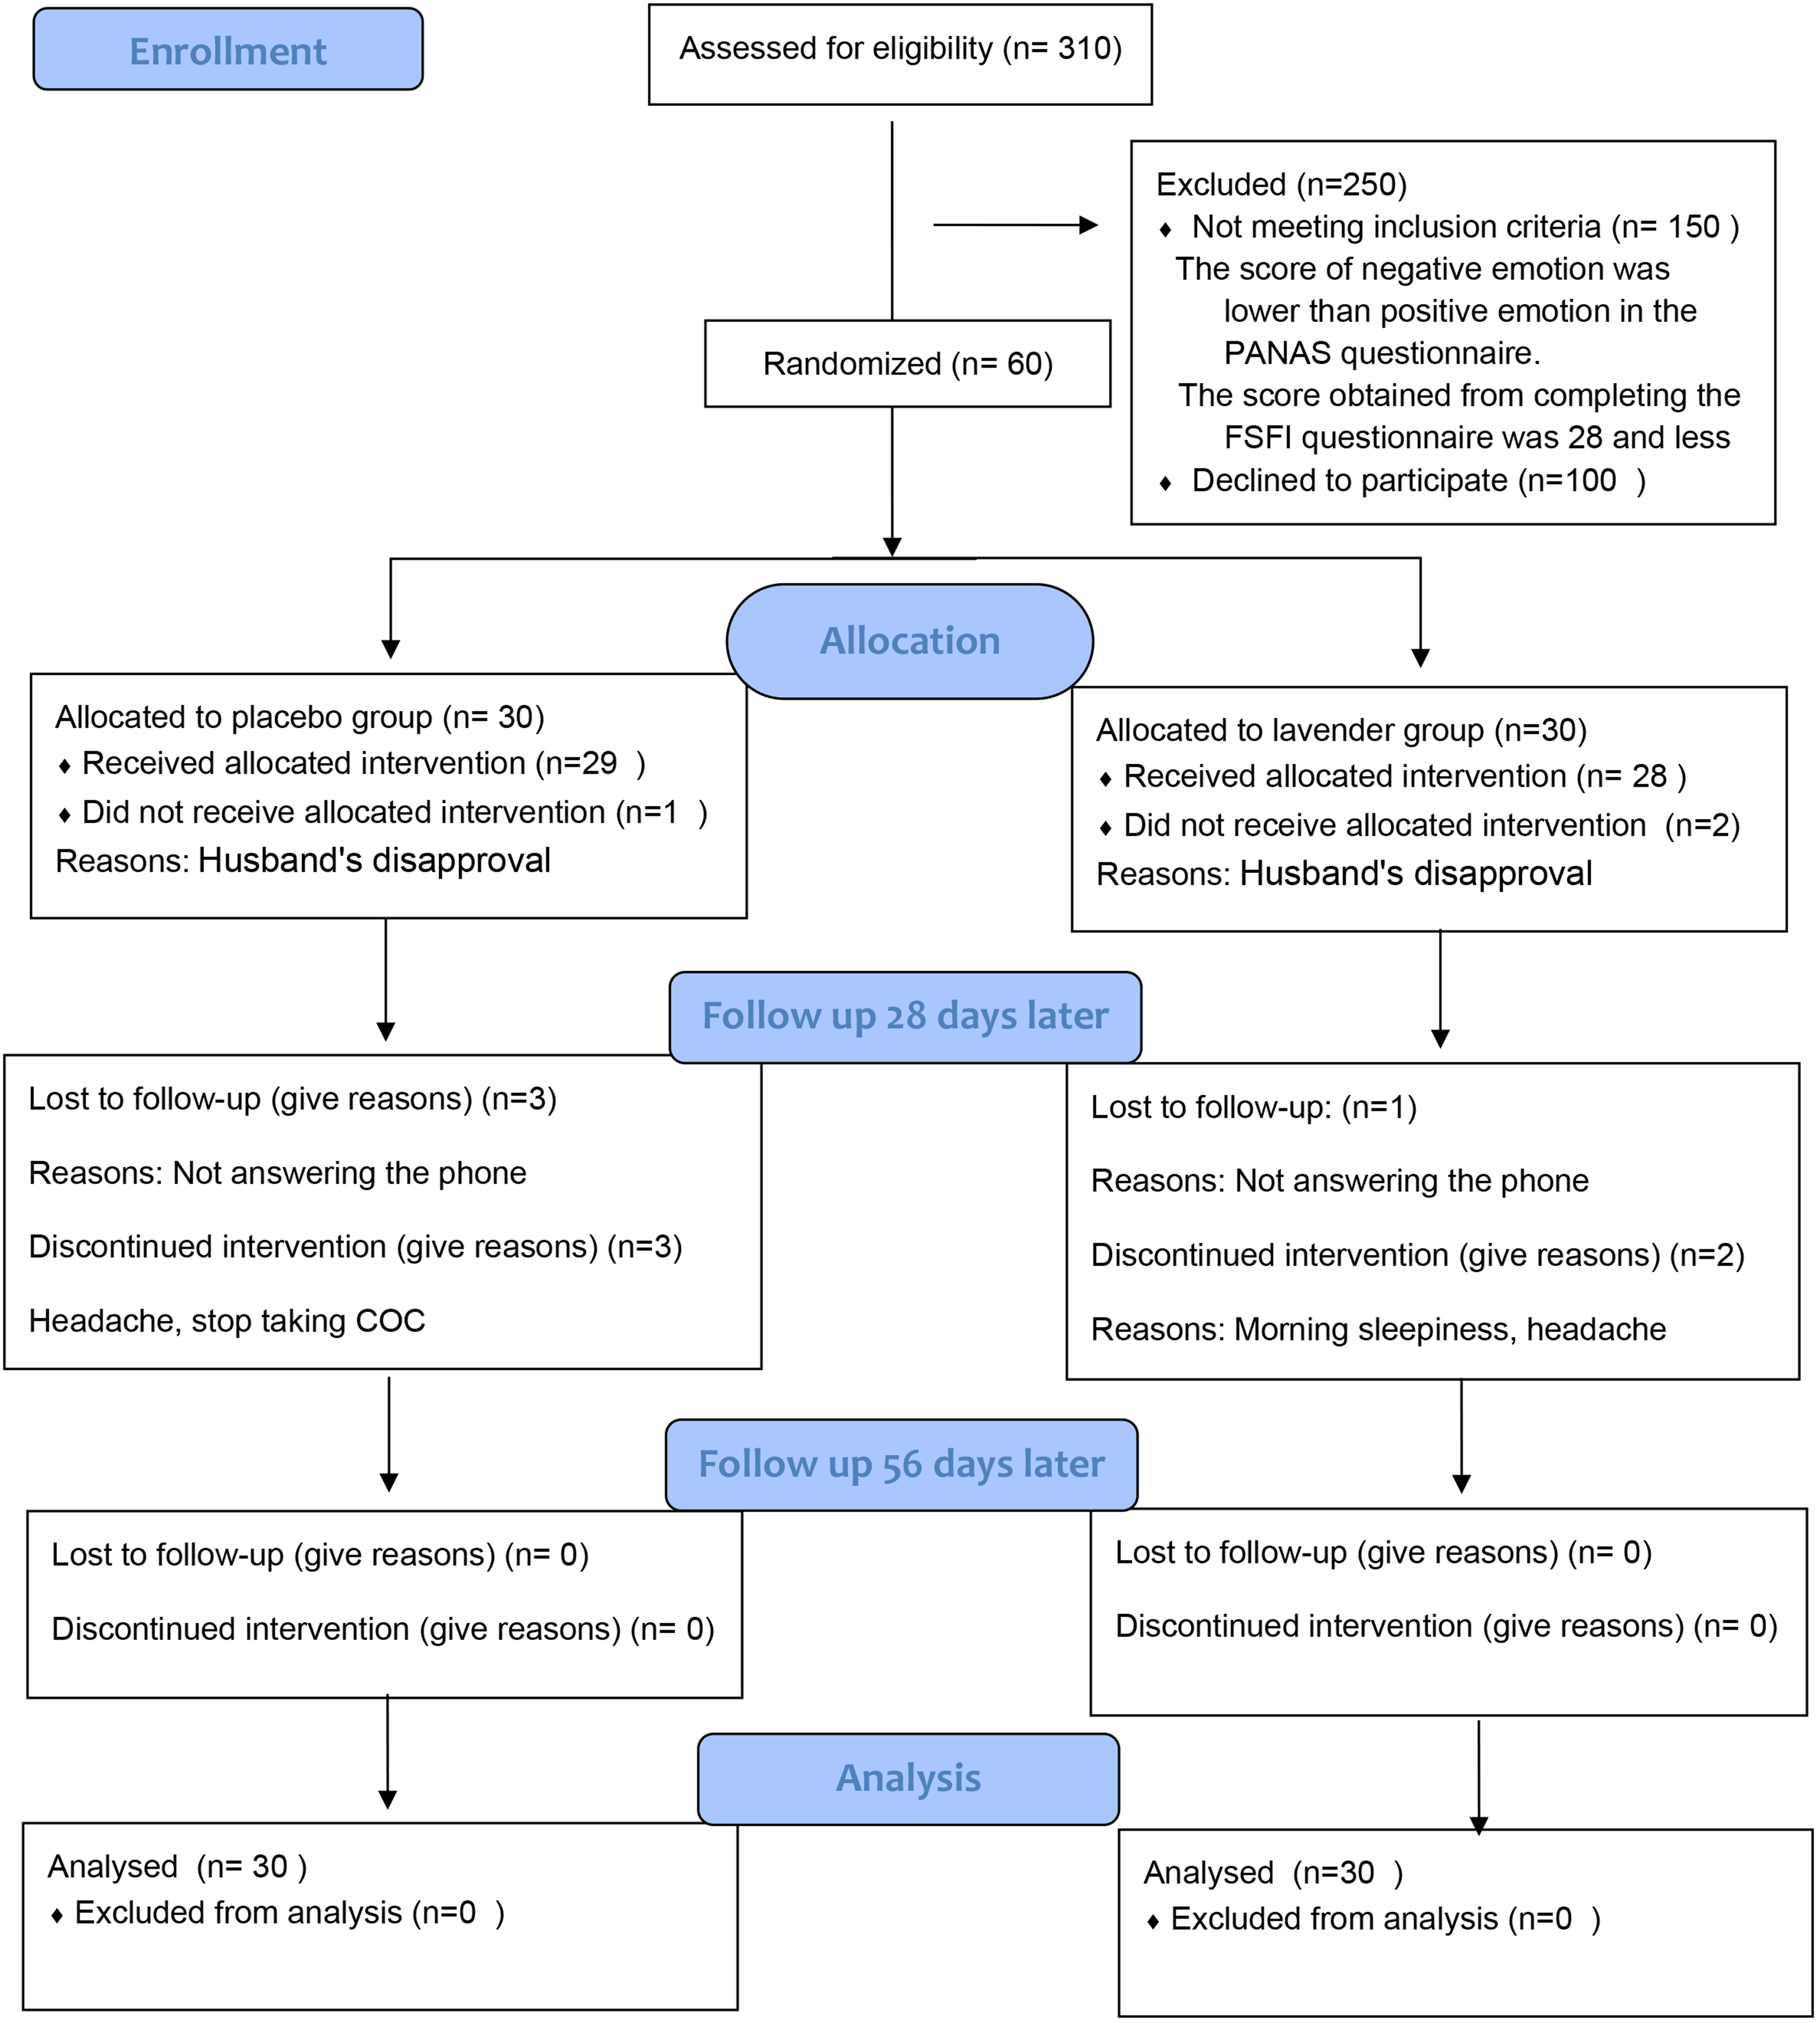 The effect of lavender on mood disorders associated with the use of combined oral contraceptives (COCs): a triple-blinded randomized controlled trial